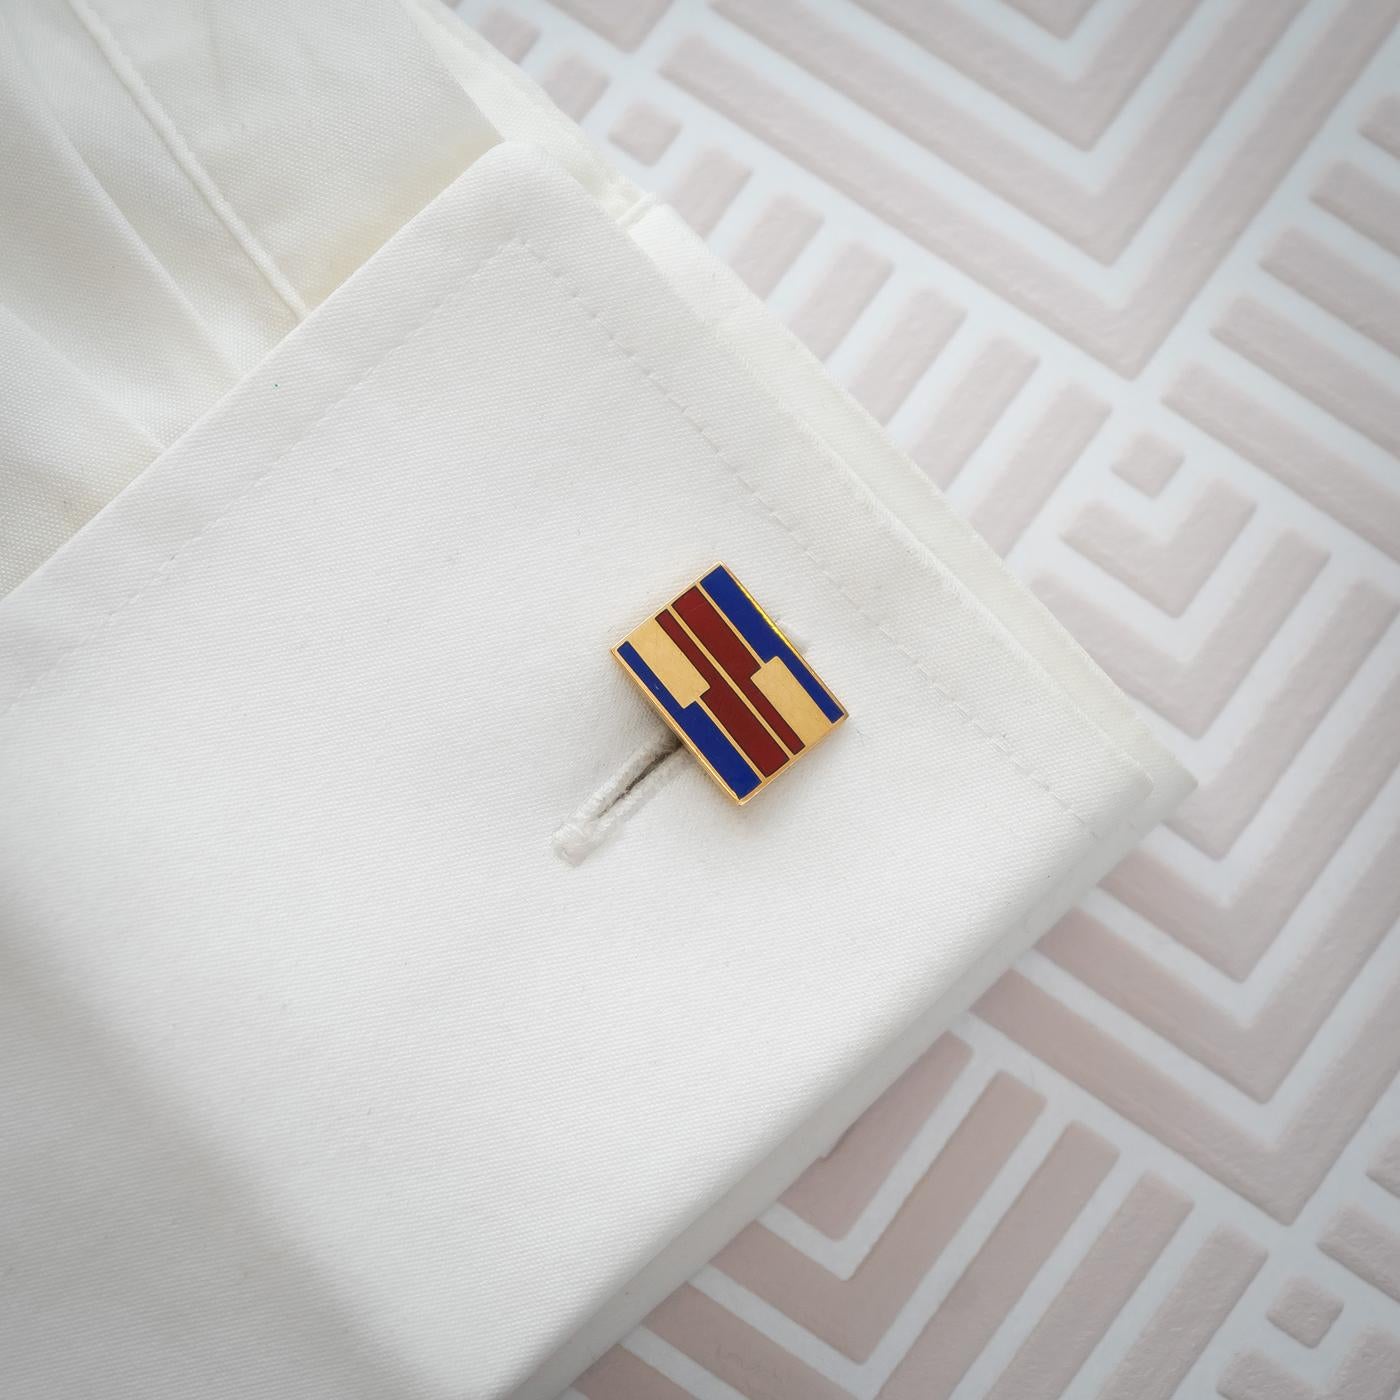 A pair of vintage Larter & Sons enamel and gold cufflinks, with red and blue enamel in a geometric design, on rectangular gold plates, mounted in 14ct gold, with the Larter maker's mark and 14K fineness marks on the bar fittings, American, circa